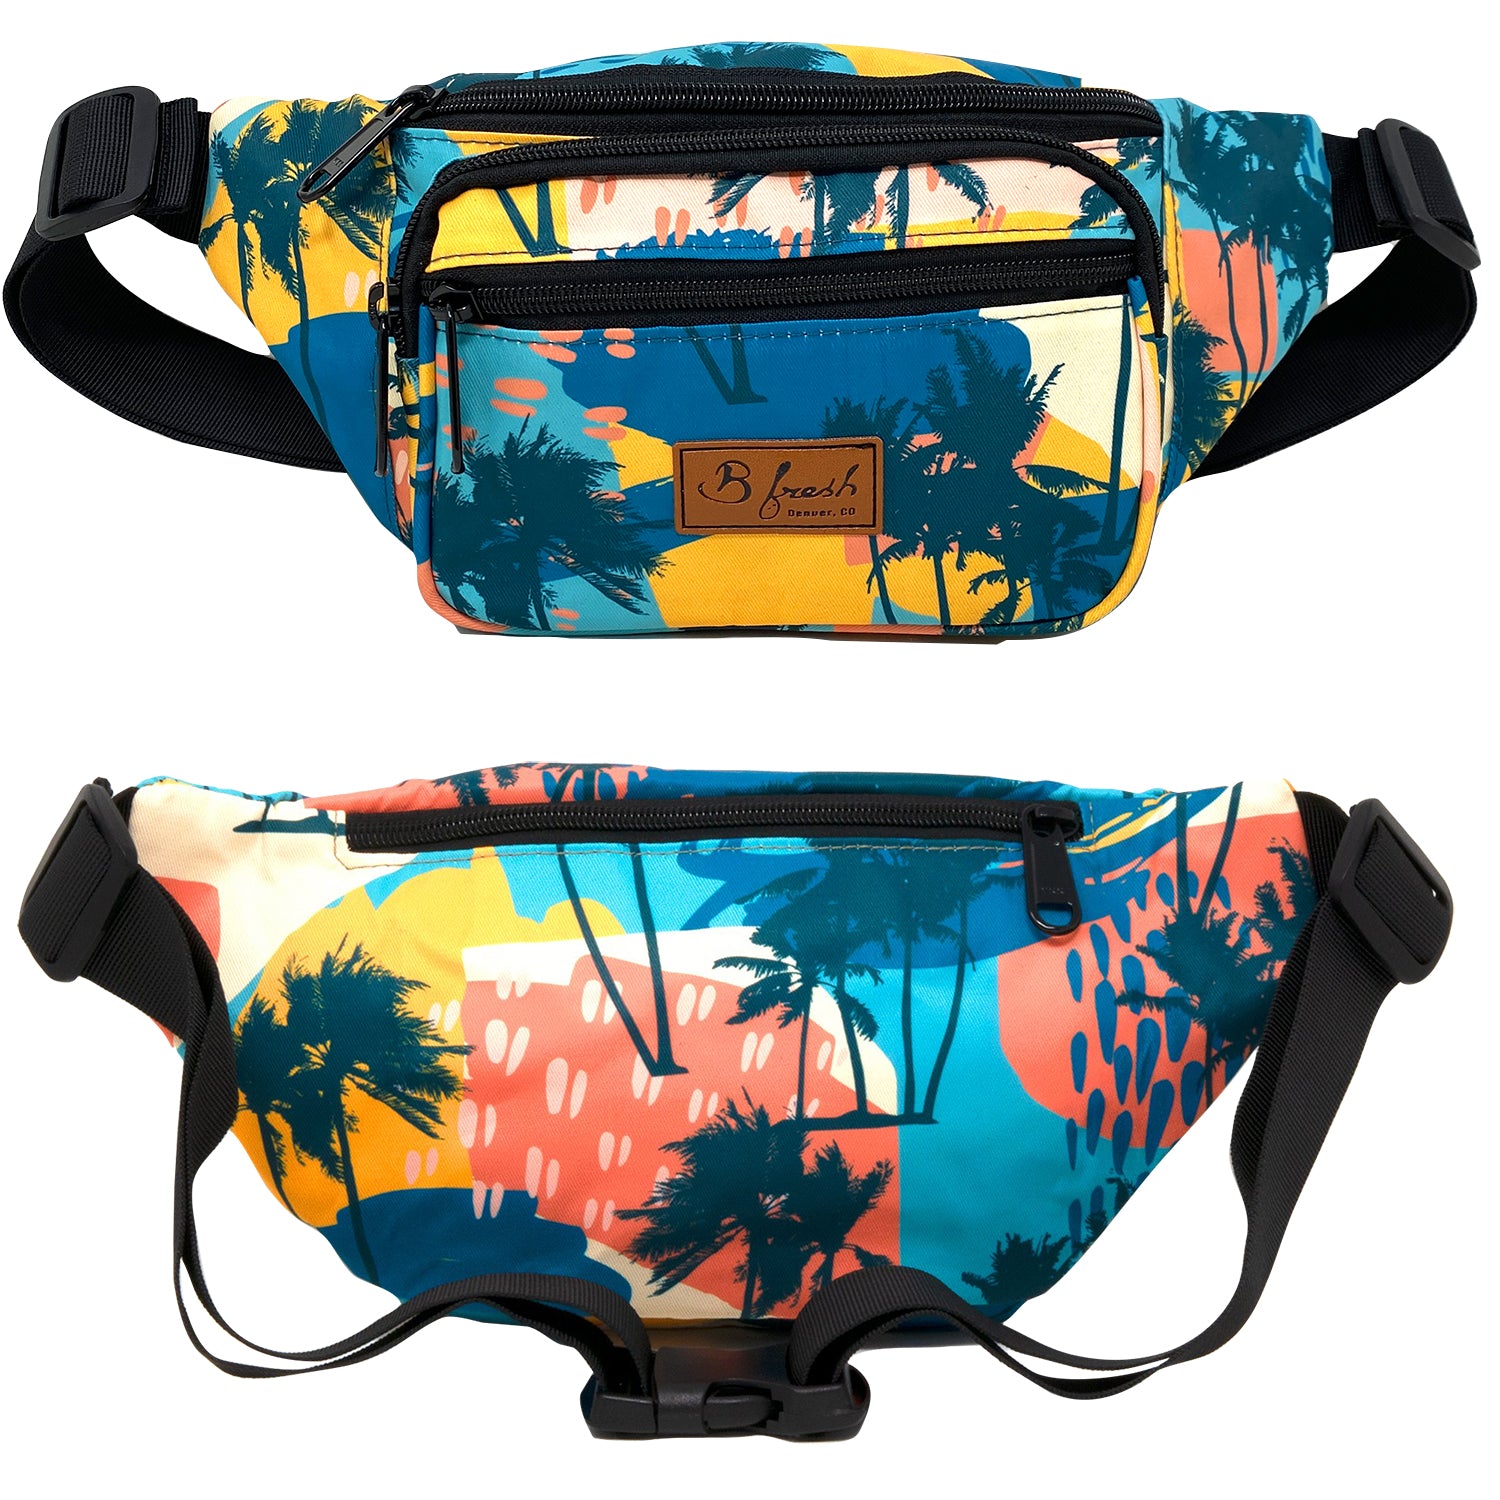 Beach Bum Fanny Pack - 80s inspired retro beach miami style fanny pack with blue yellow pink palm trees and beaches.  B Fresh Gear